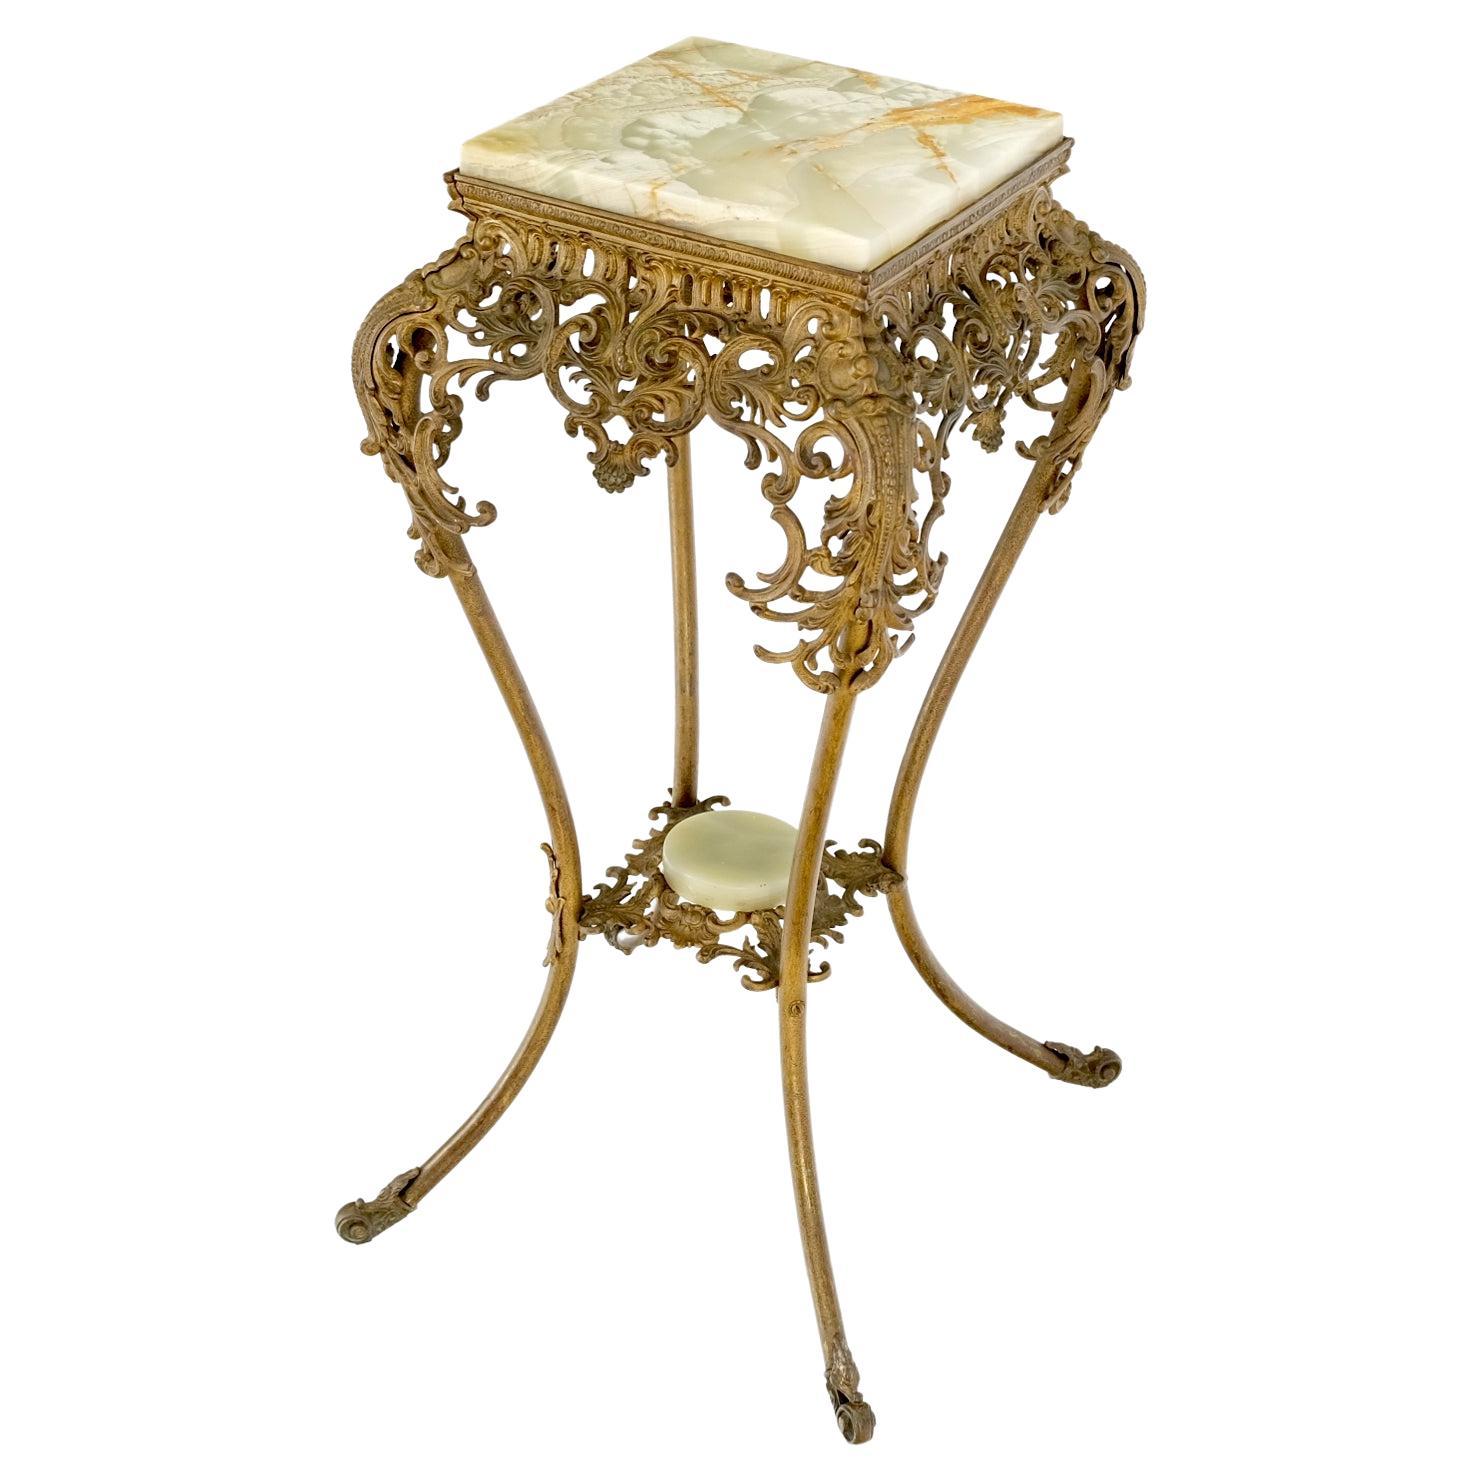 Onyx Top Ornate Gilt Brass Base Lamp Table Stand Pedestal 